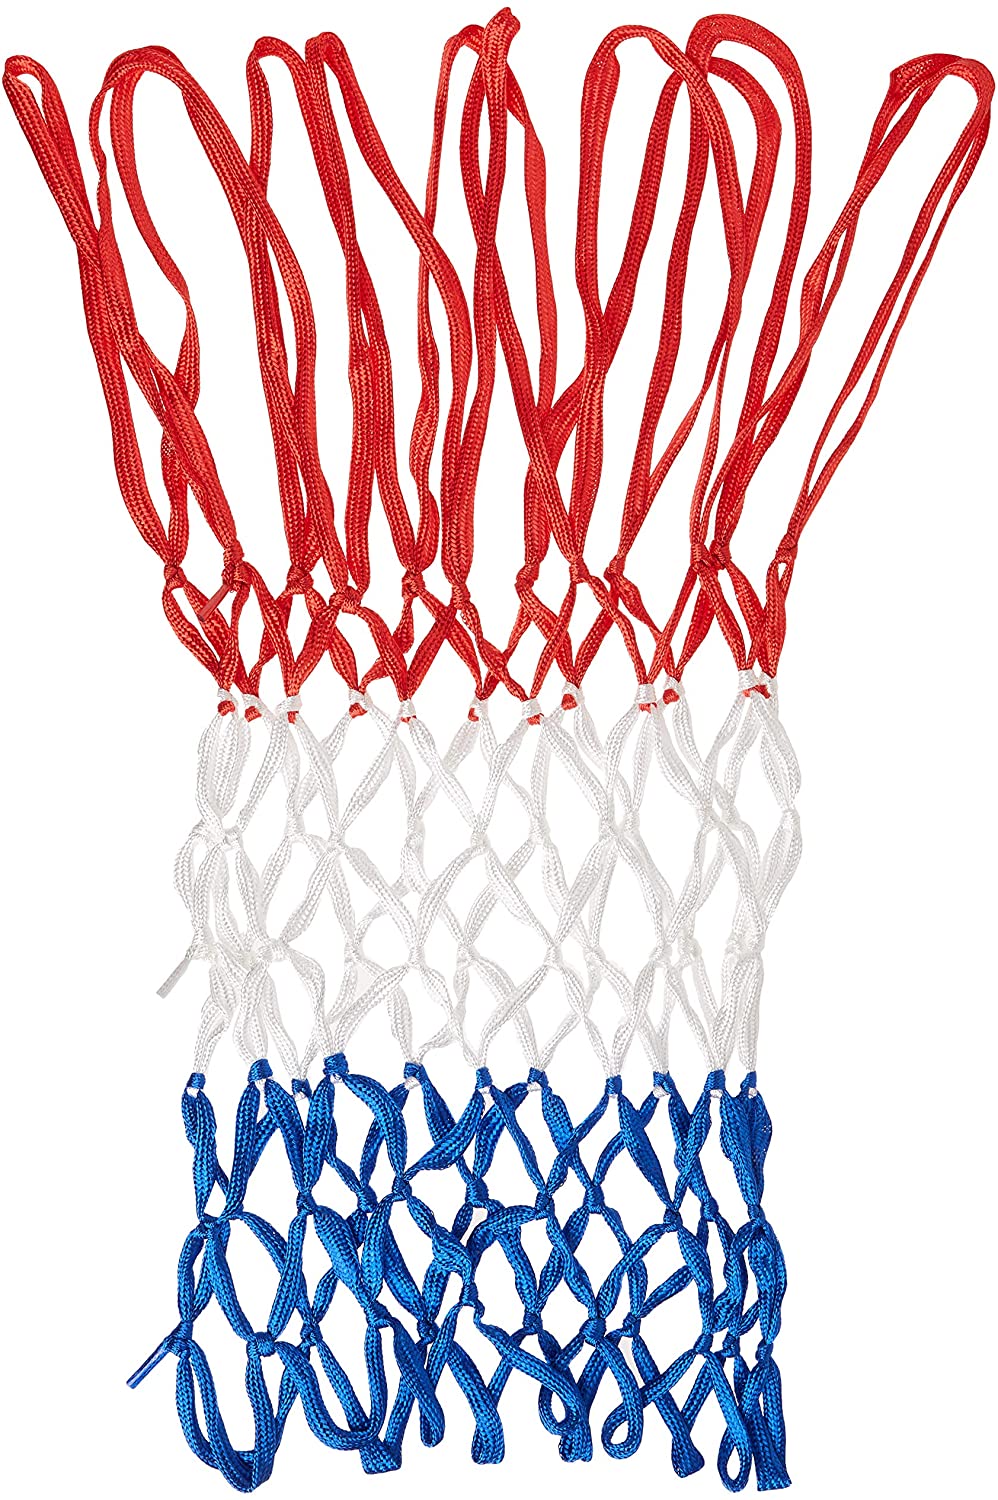 Spalding Outdoor Red, White & Blue Basketball Net $2.99 or Heavy Duty Indoor White Basketball Net $2.47 + Free Shipping (Prime)